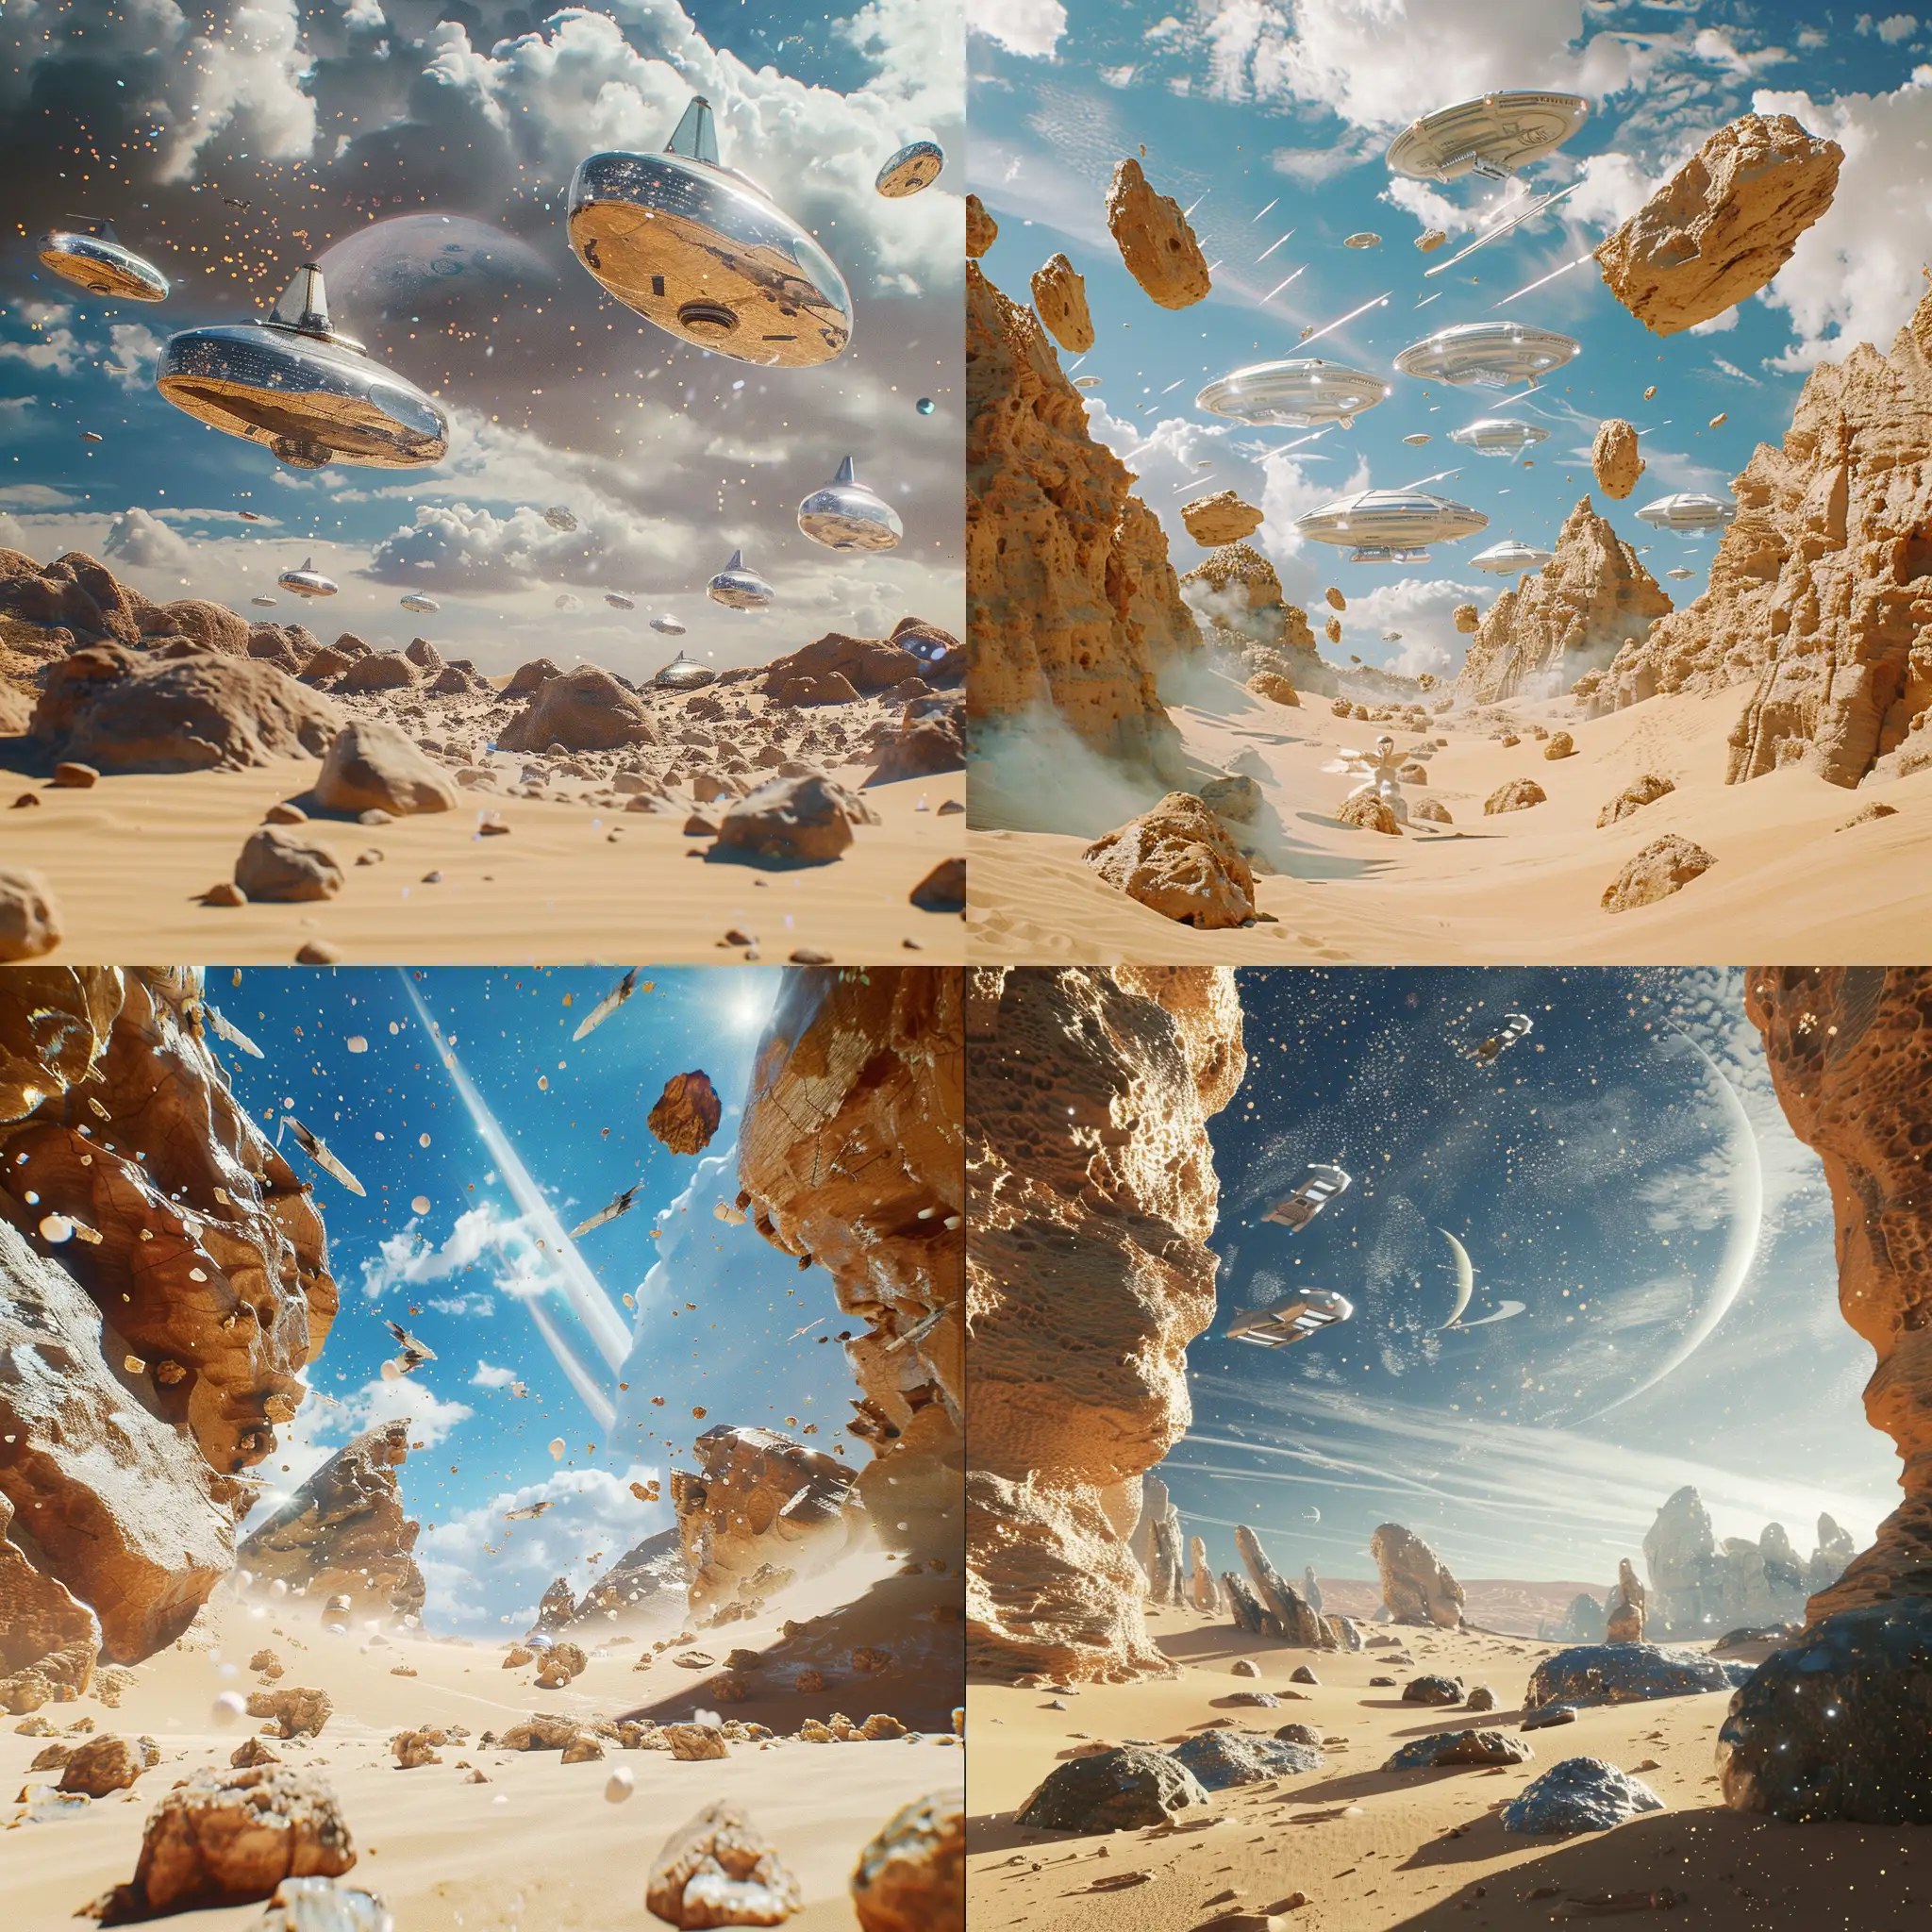 Cosmic-Landscape-of-Fantastic-Planet-DuneInspired-Cosmic-Scene-with-Spaceships